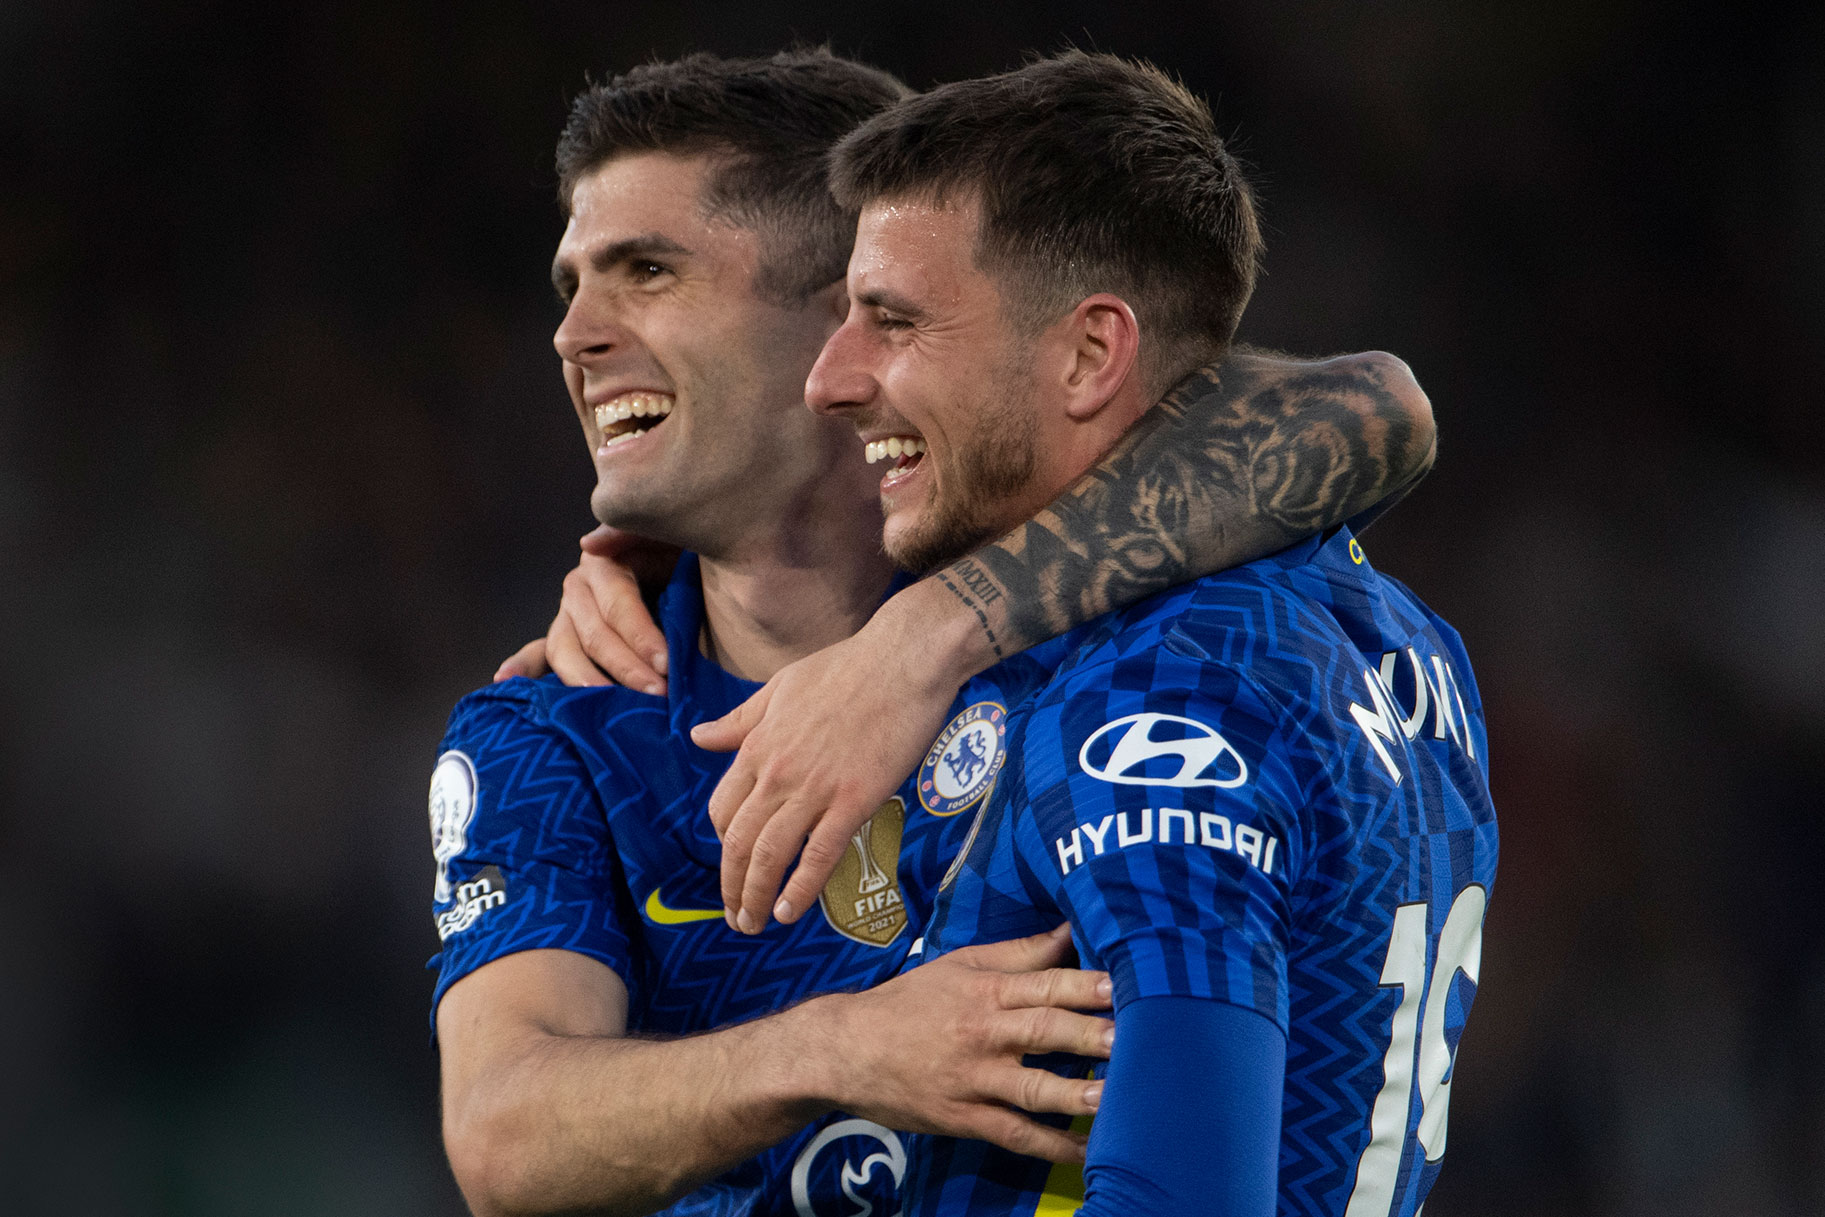 Christian Pulisic of Chelsea celebrates scoring the second goal with team mate Mason Mount during the Premier League match between Leeds United and Chelsea